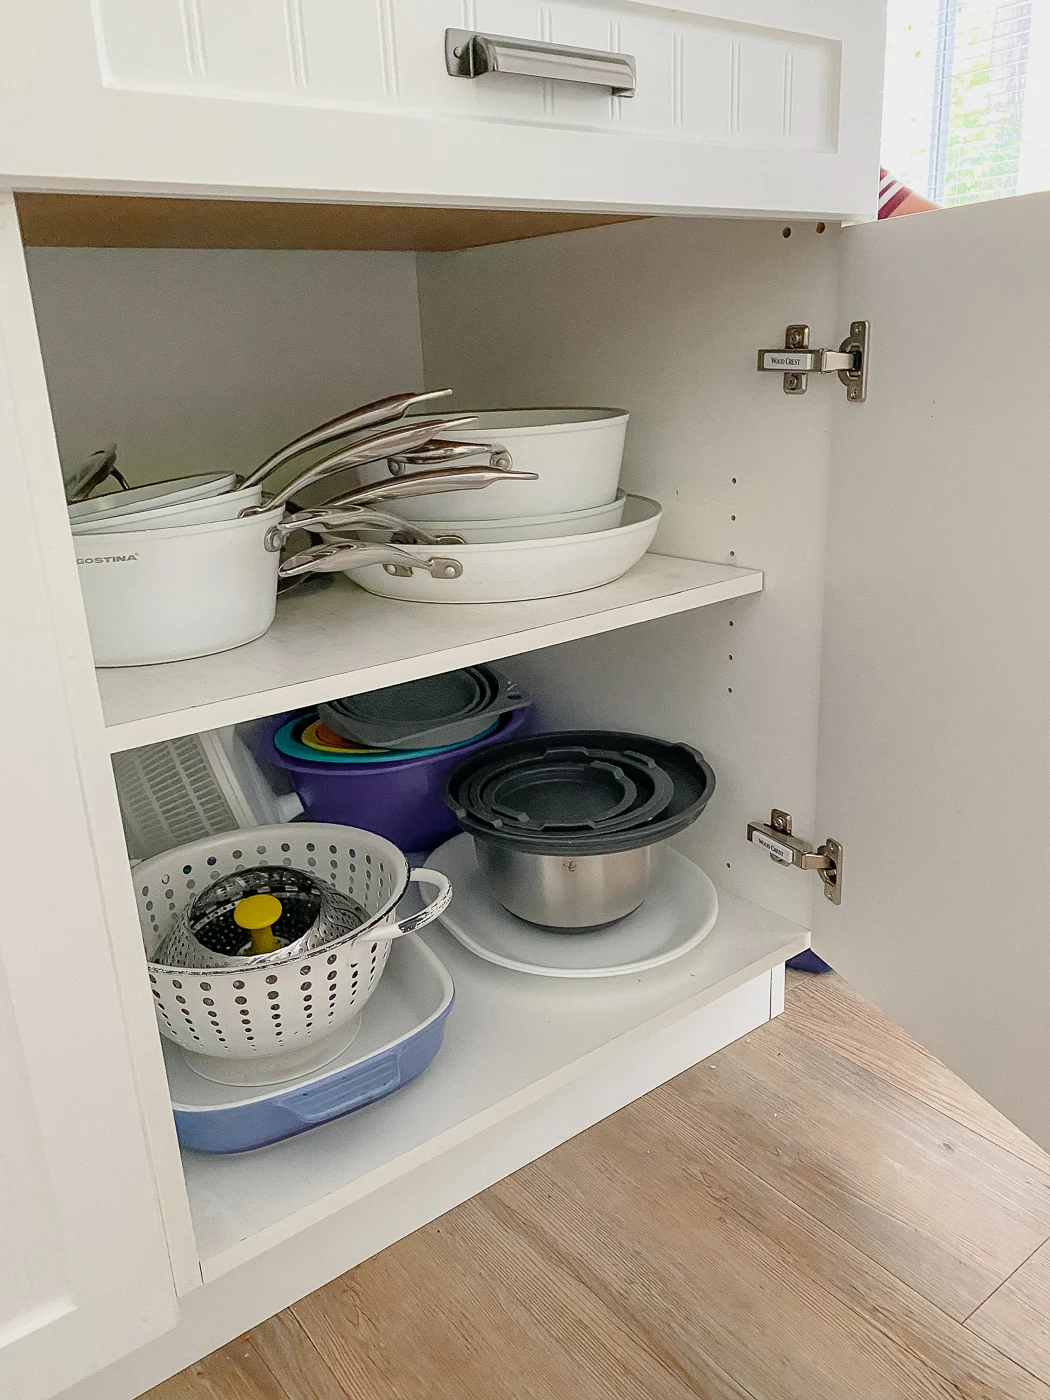 how to organize pots and pans, pots and pans storage ideas, organizing pots and pans